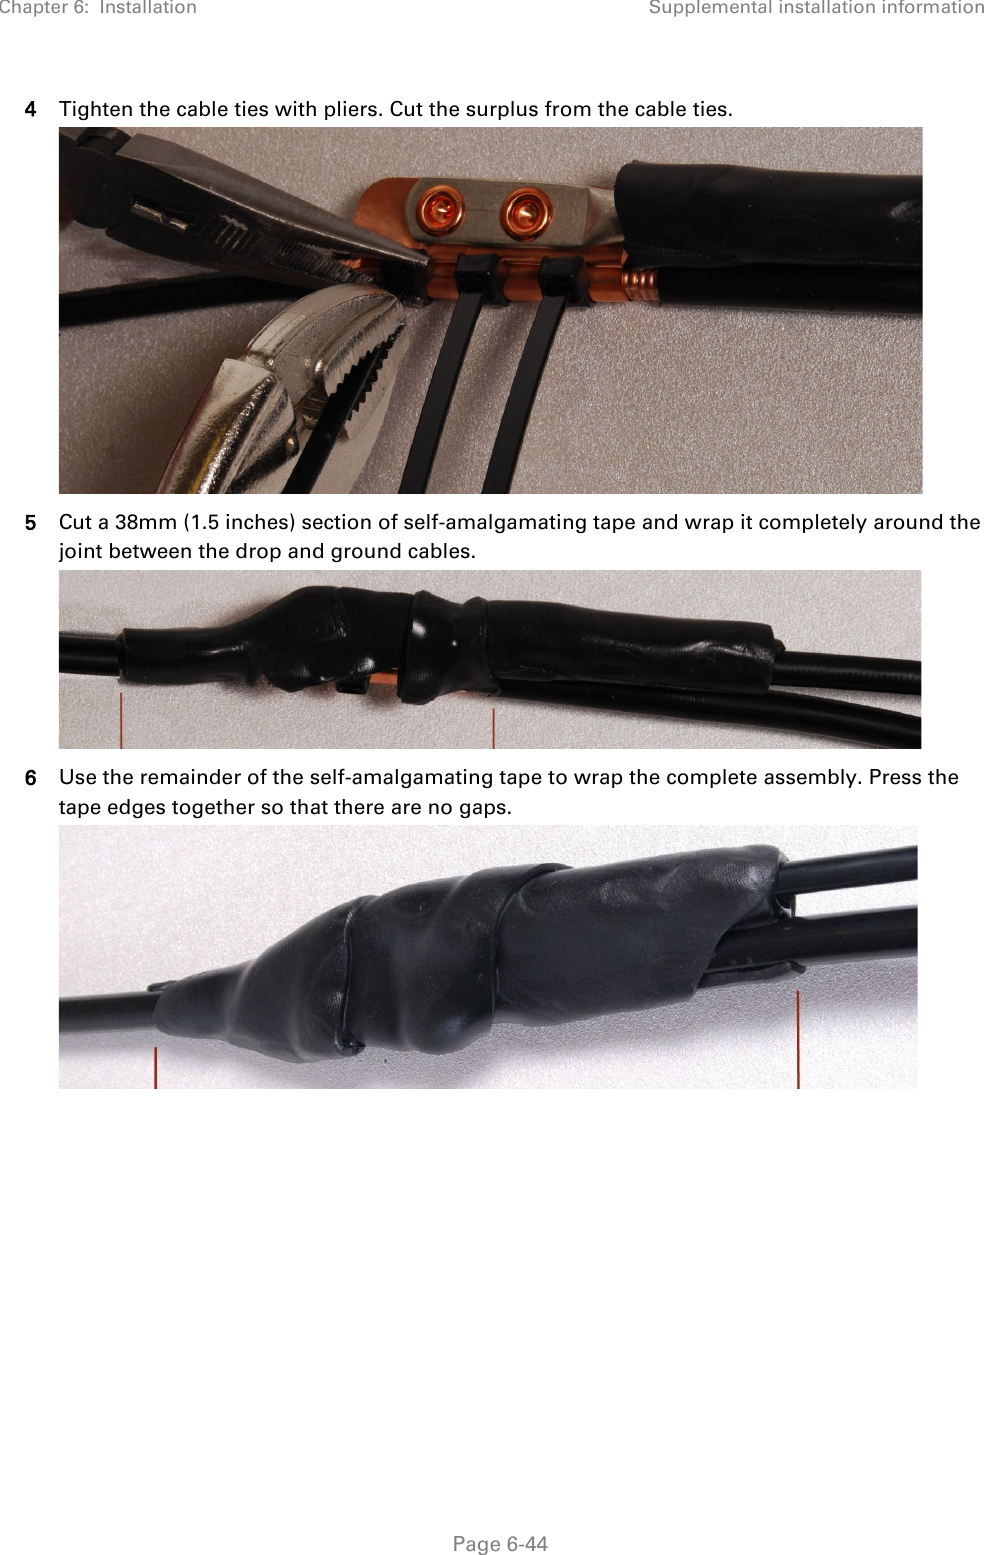 Chapter 6:  Installation Supplemental installation information   Page 6-44 4 Tighten the cable ties with pliers. Cut the surplus from the cable ties.  5 Cut a 38mm (1.5 inches) section of self-amalgamating tape and wrap it completely around the joint between the drop and ground cables.  6 Use the remainder of the self-amalgamating tape to wrap the complete assembly. Press the tape edges together so that there are no gaps.  